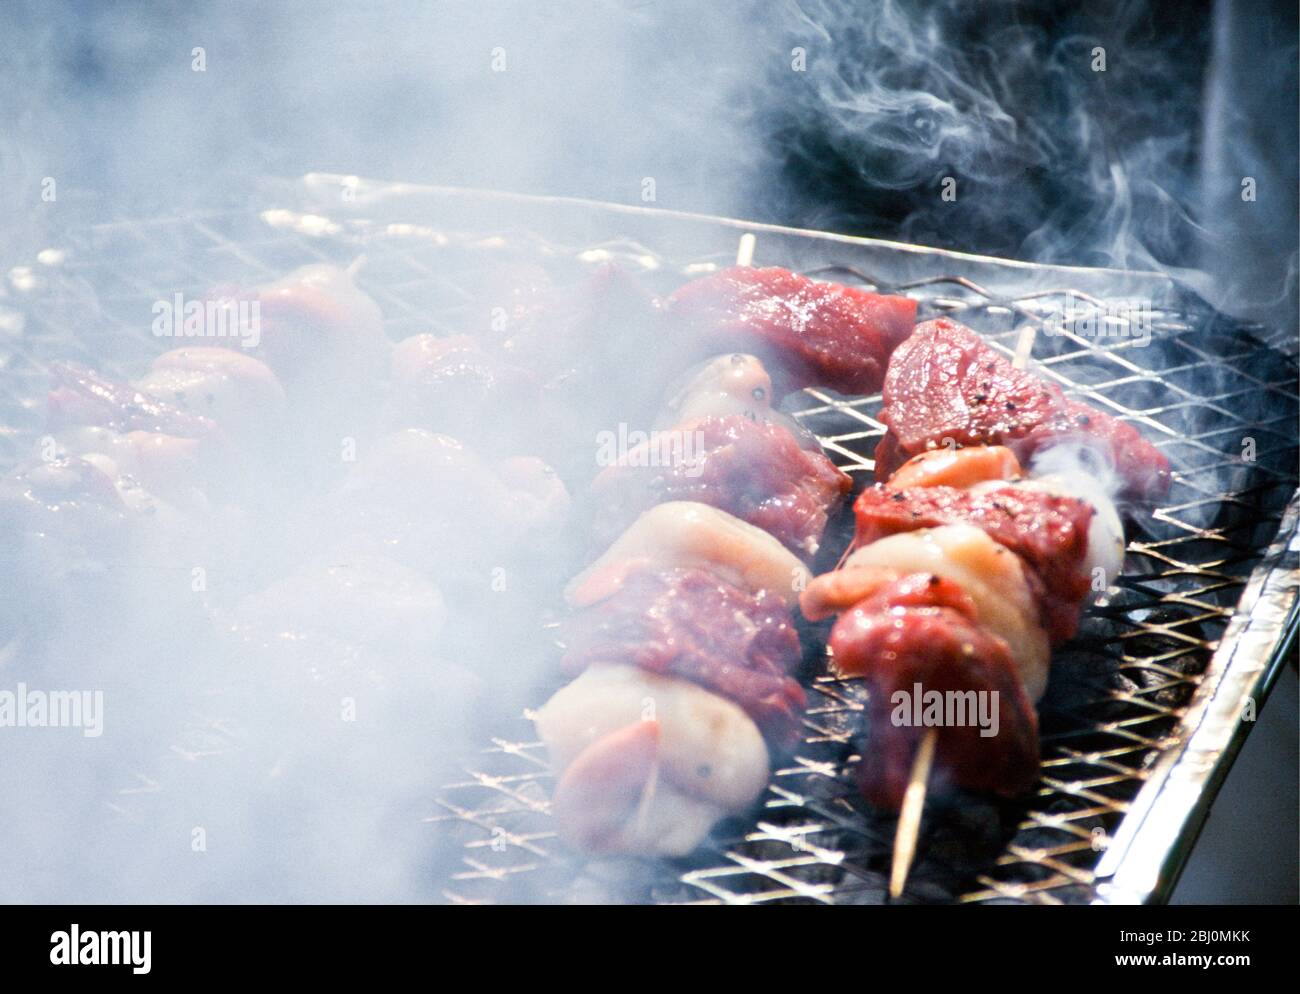 Grilling scallop and steak kebabs on a charcoal fired barbecue grill - Stock Photo